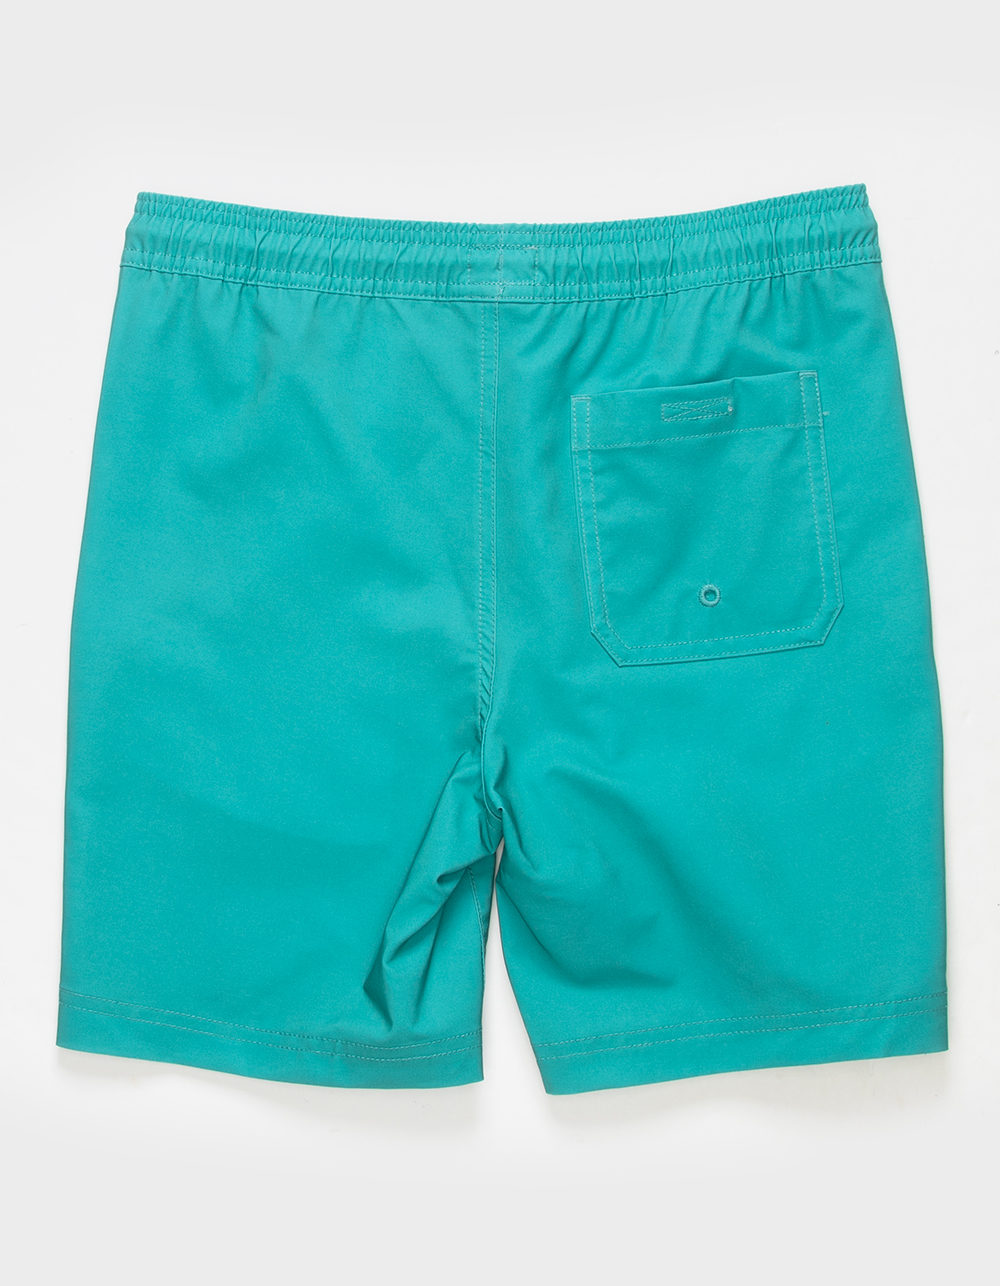 BLUE CROWN Hibiscus Color Changing Boys Swim Shorts - TEAL GREEN | Tillys